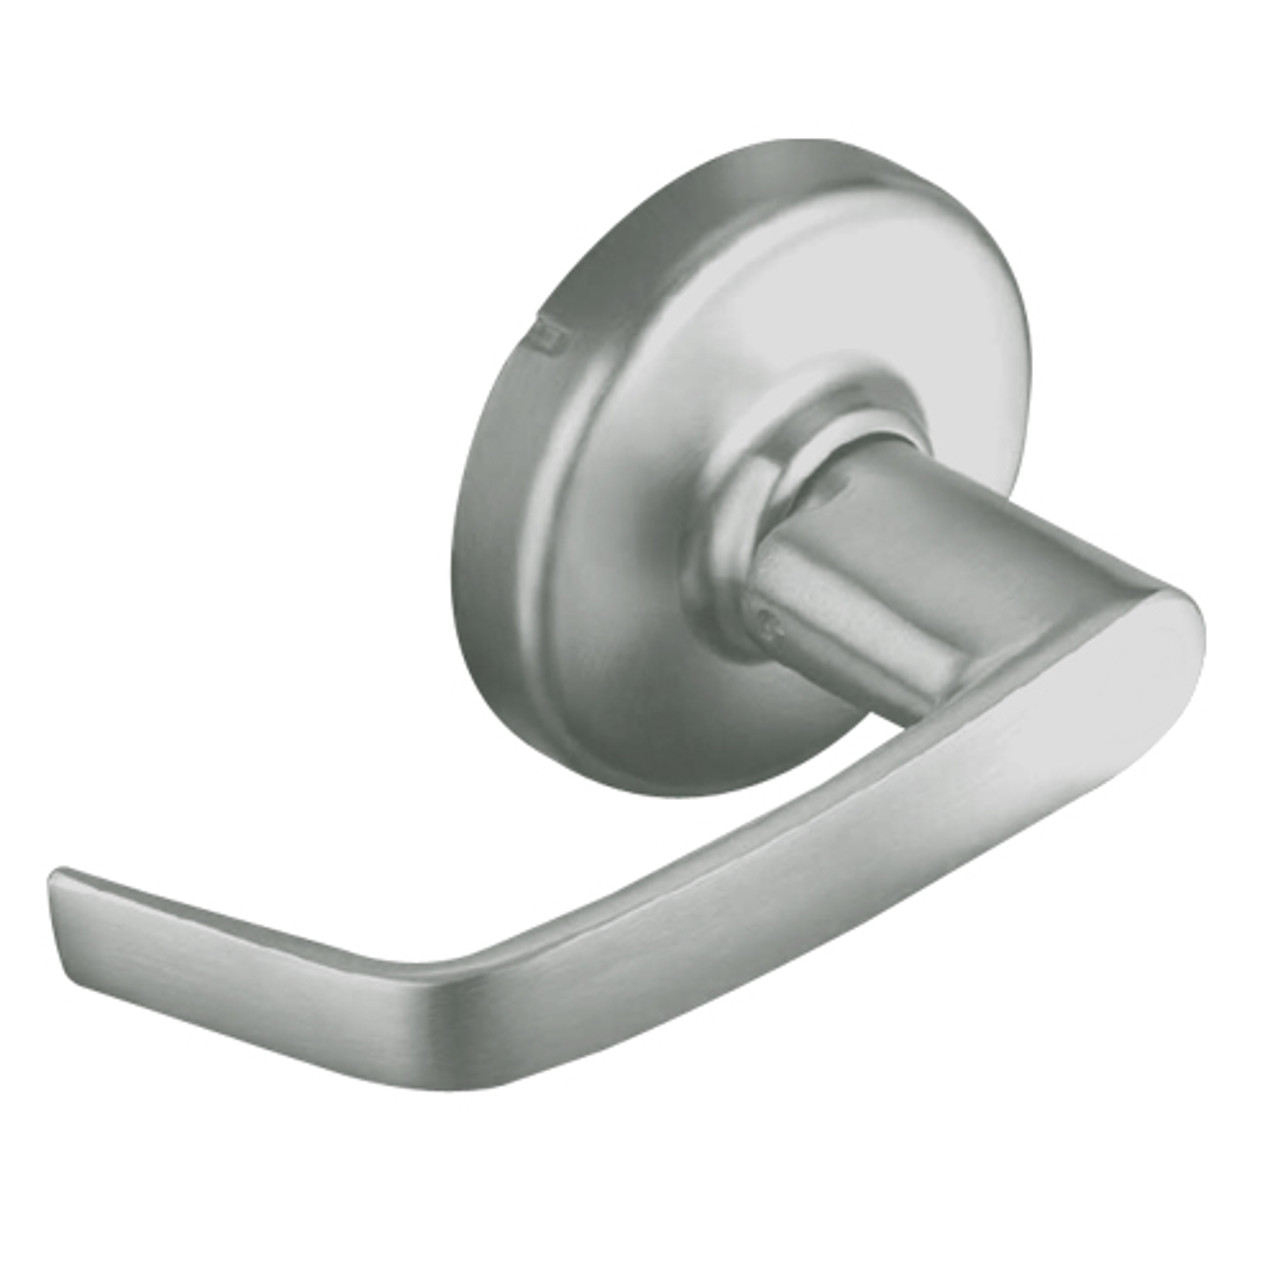 CL3170-NZD-619 Corbin CL3100 Series Vandal Resistant Full Dummy Cylindrical Locksets with Newport Lever in Satin Nickel Plated Finish